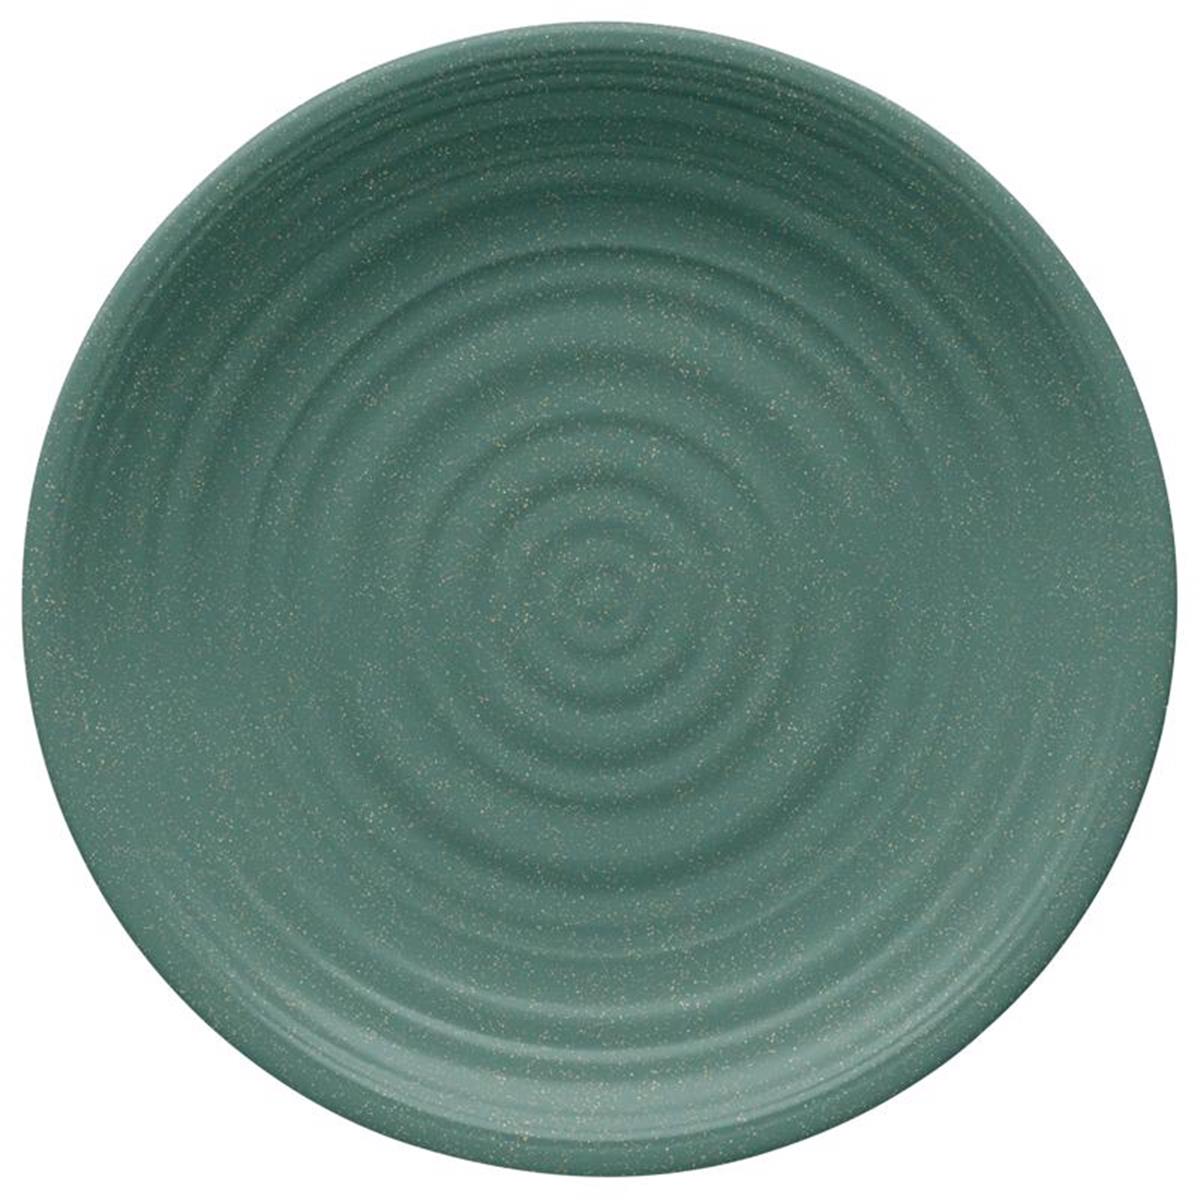 Picture of Tarhong 6032026 10.5 in. Dia. Bamboo Planta Artisan Dinner Plate, Teal - Pack of 6